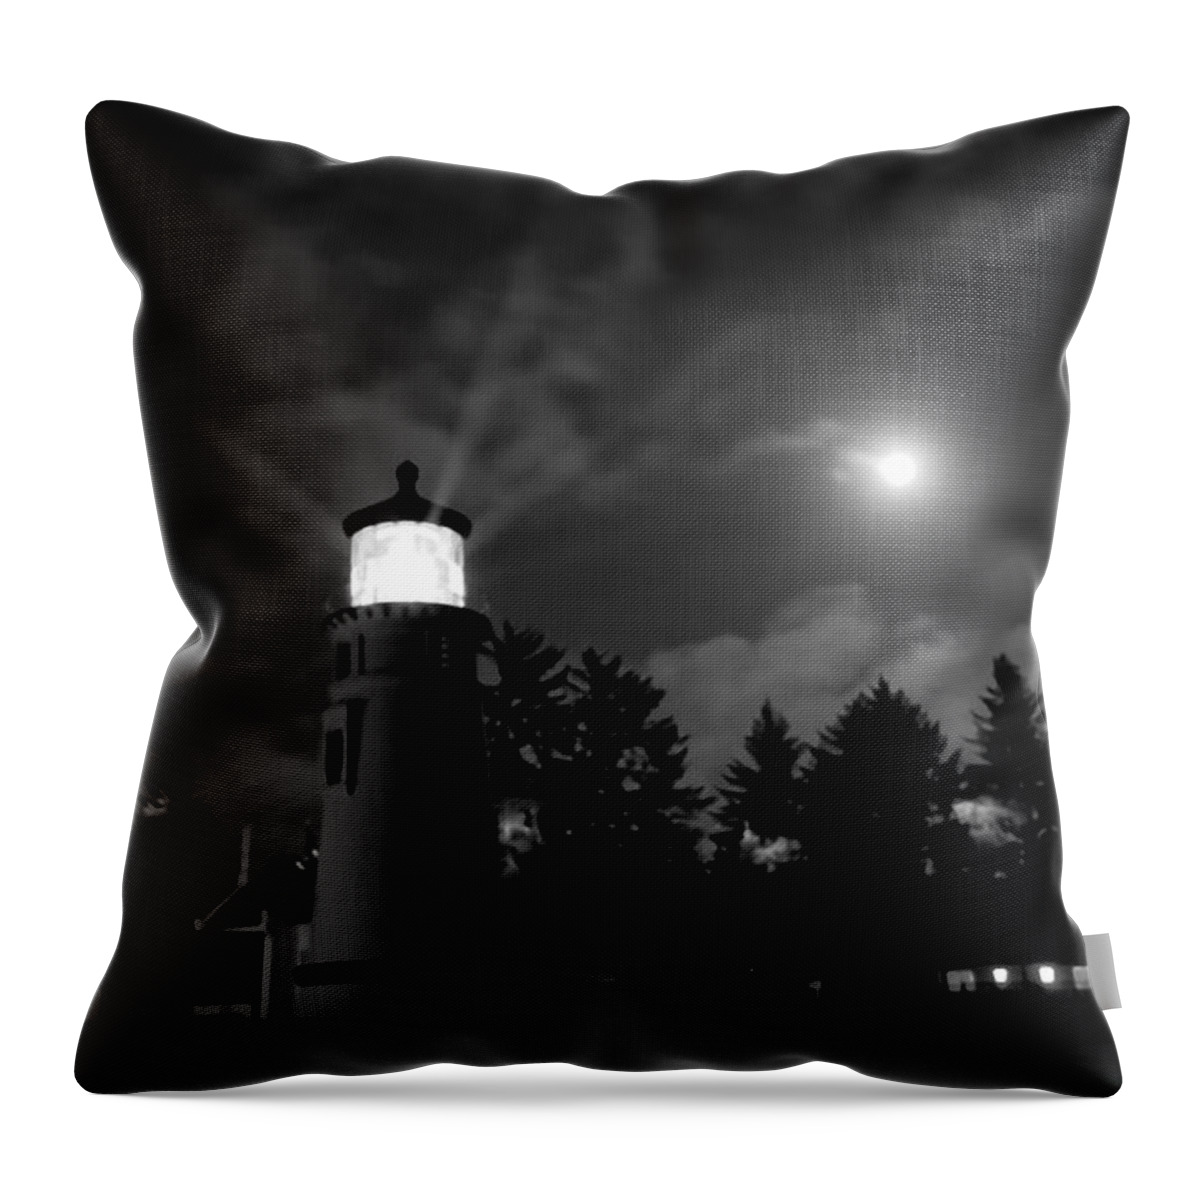 Adria Trail Throw Pillow featuring the photograph August Moon by Adria Trail